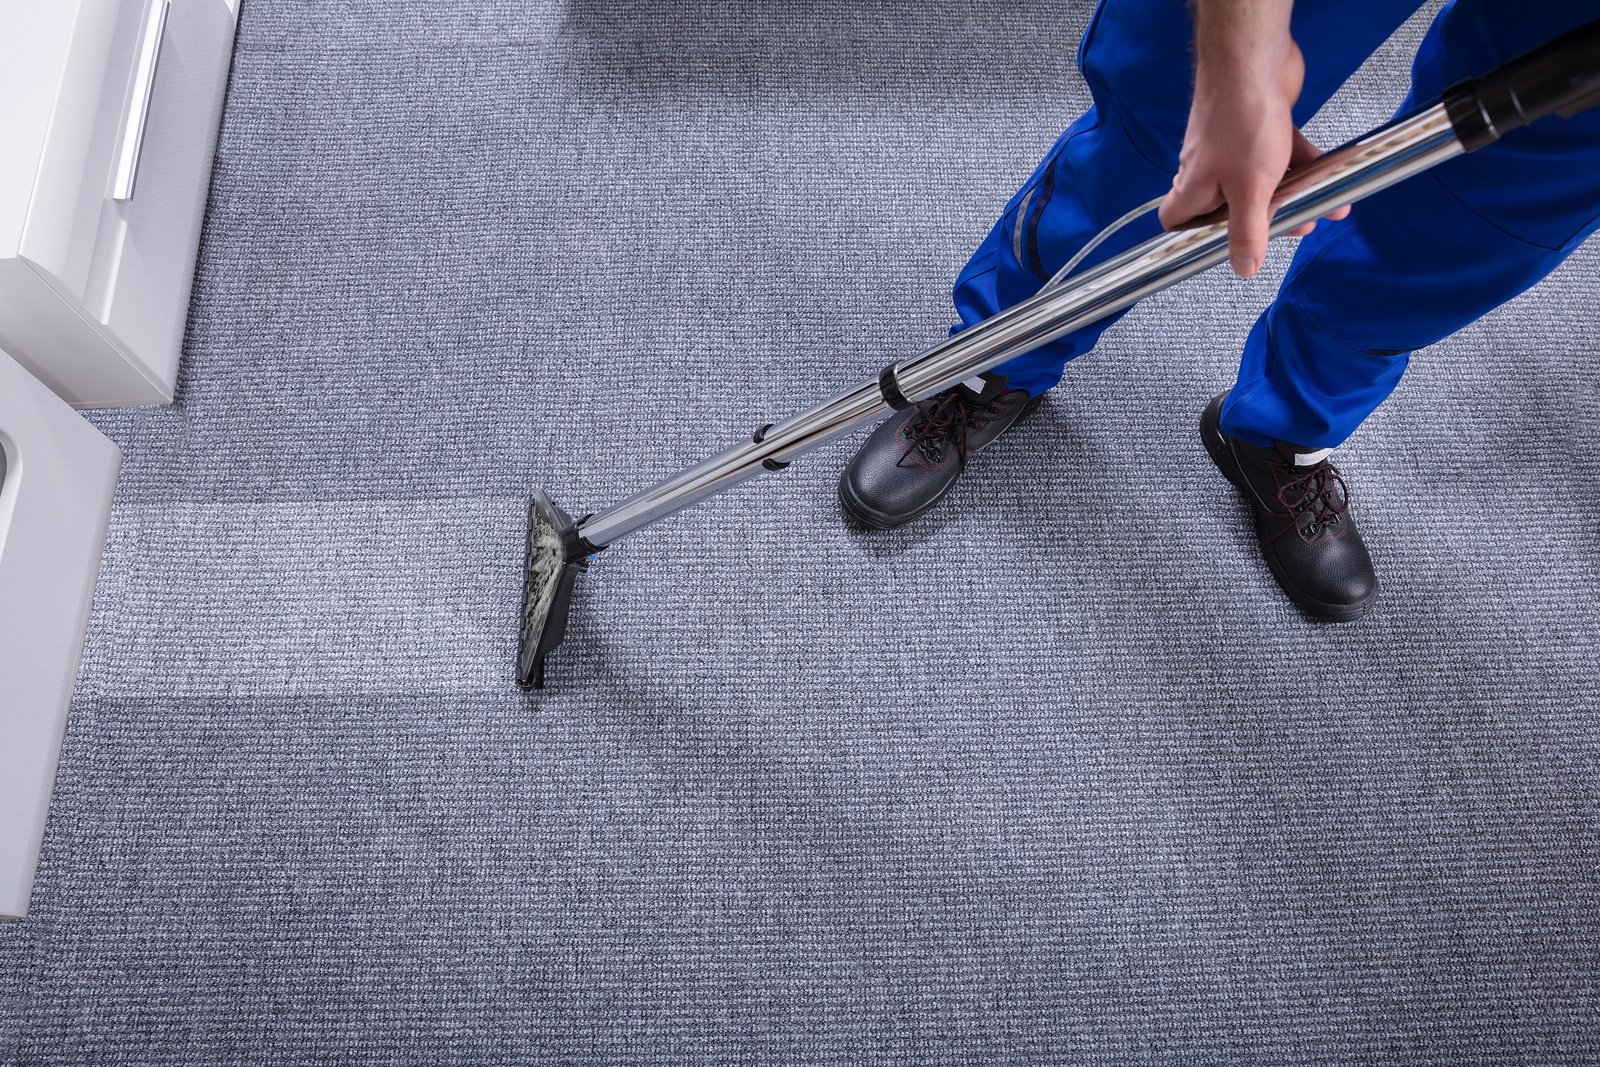 commercial carpet cleaning services in San Antonio, TX